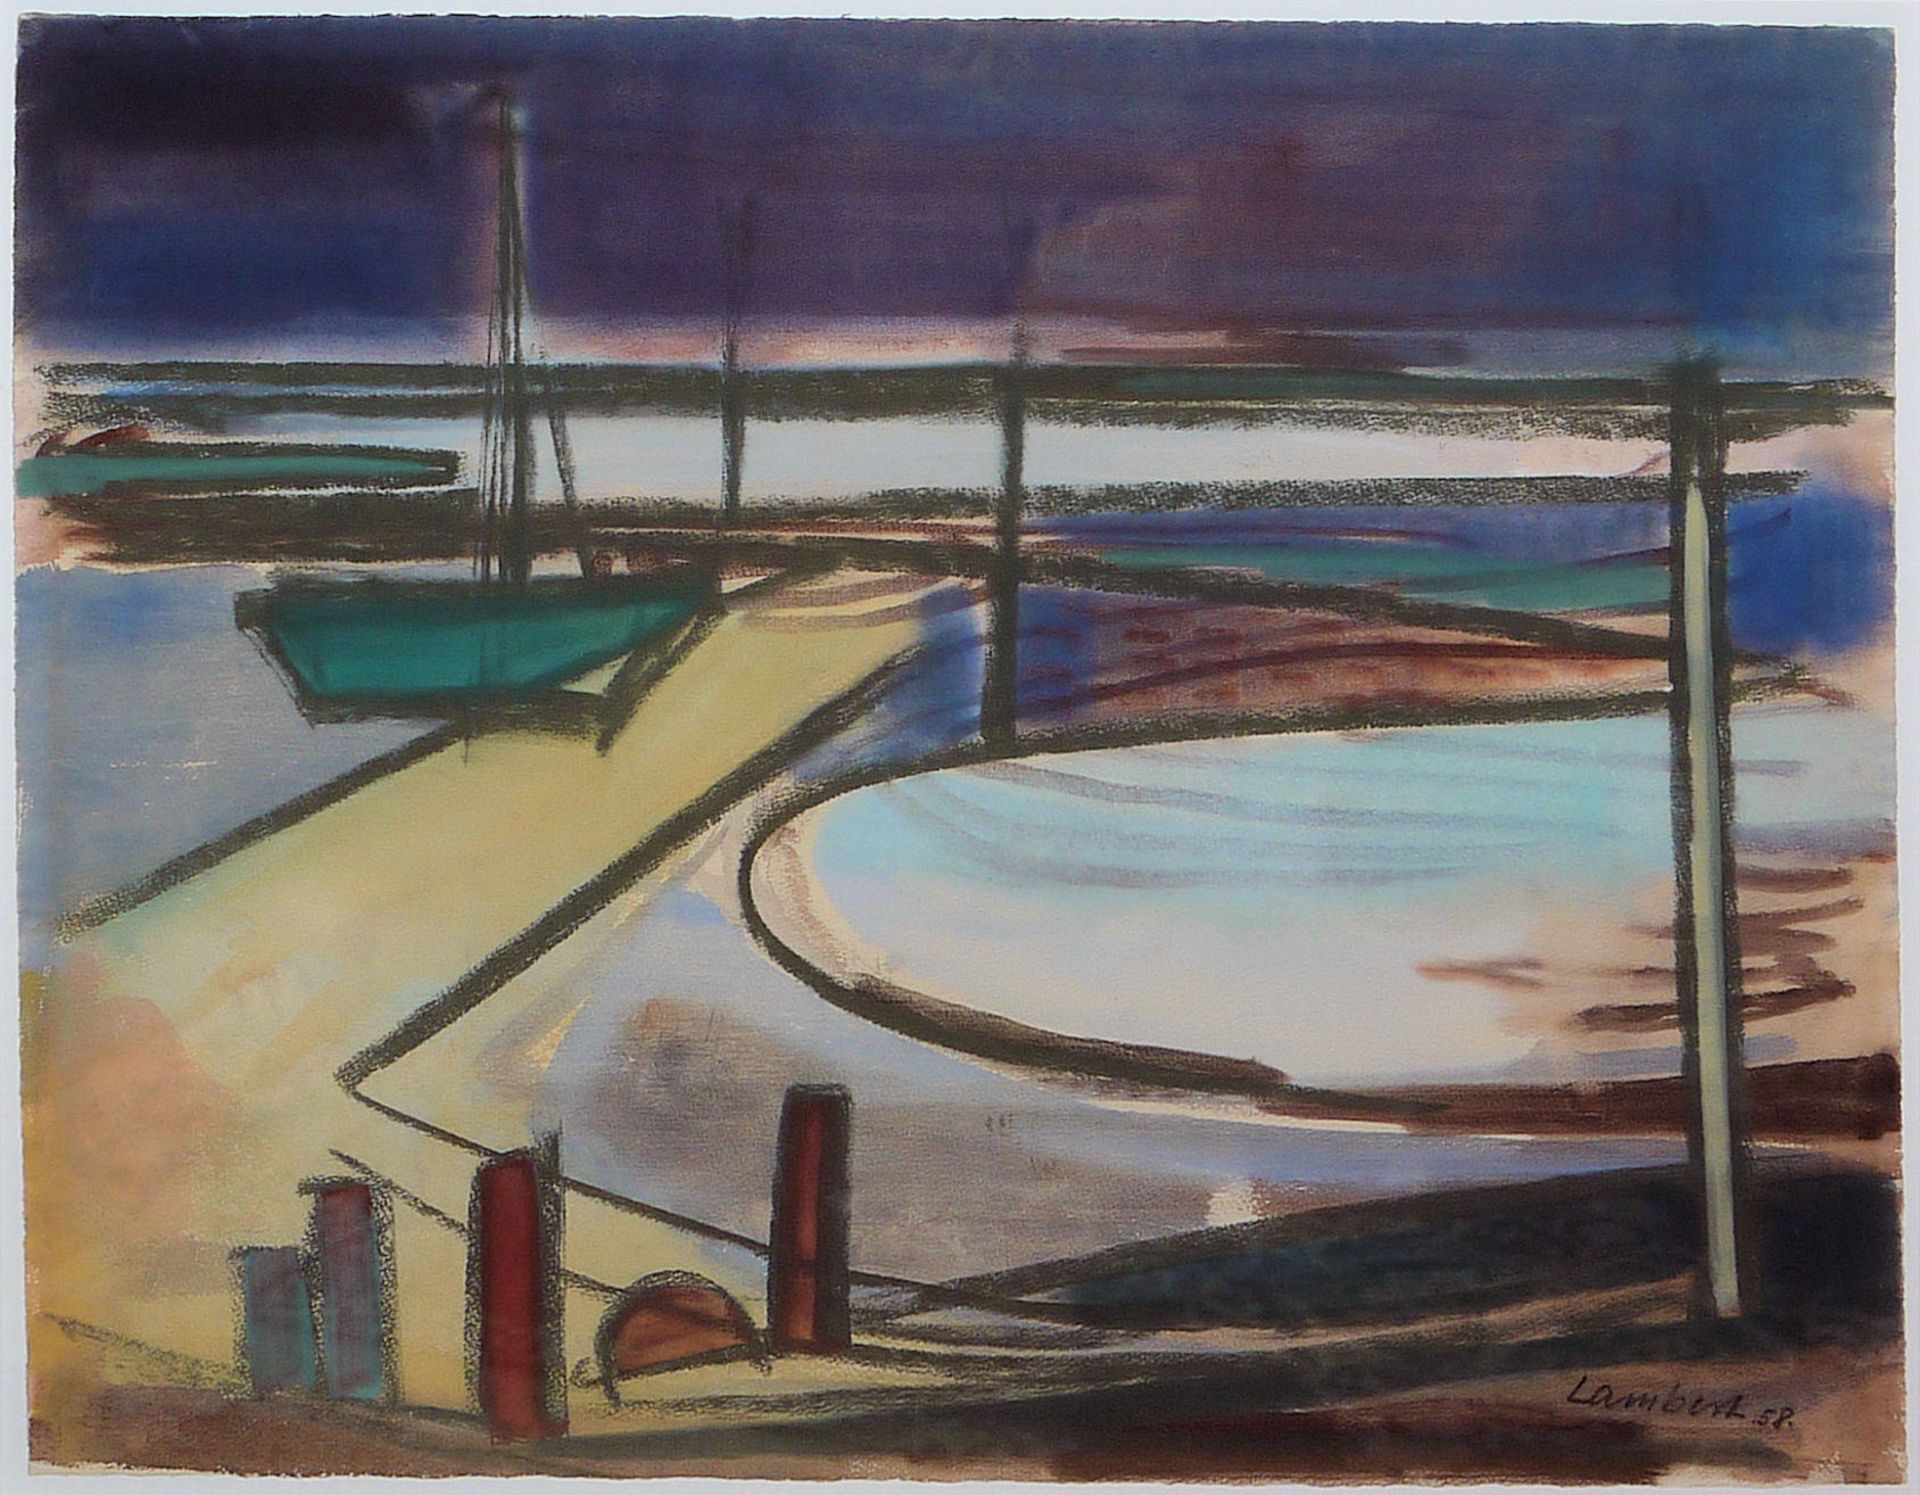 Kurt Lambert, View of a small harbour, signed drawing from 1958